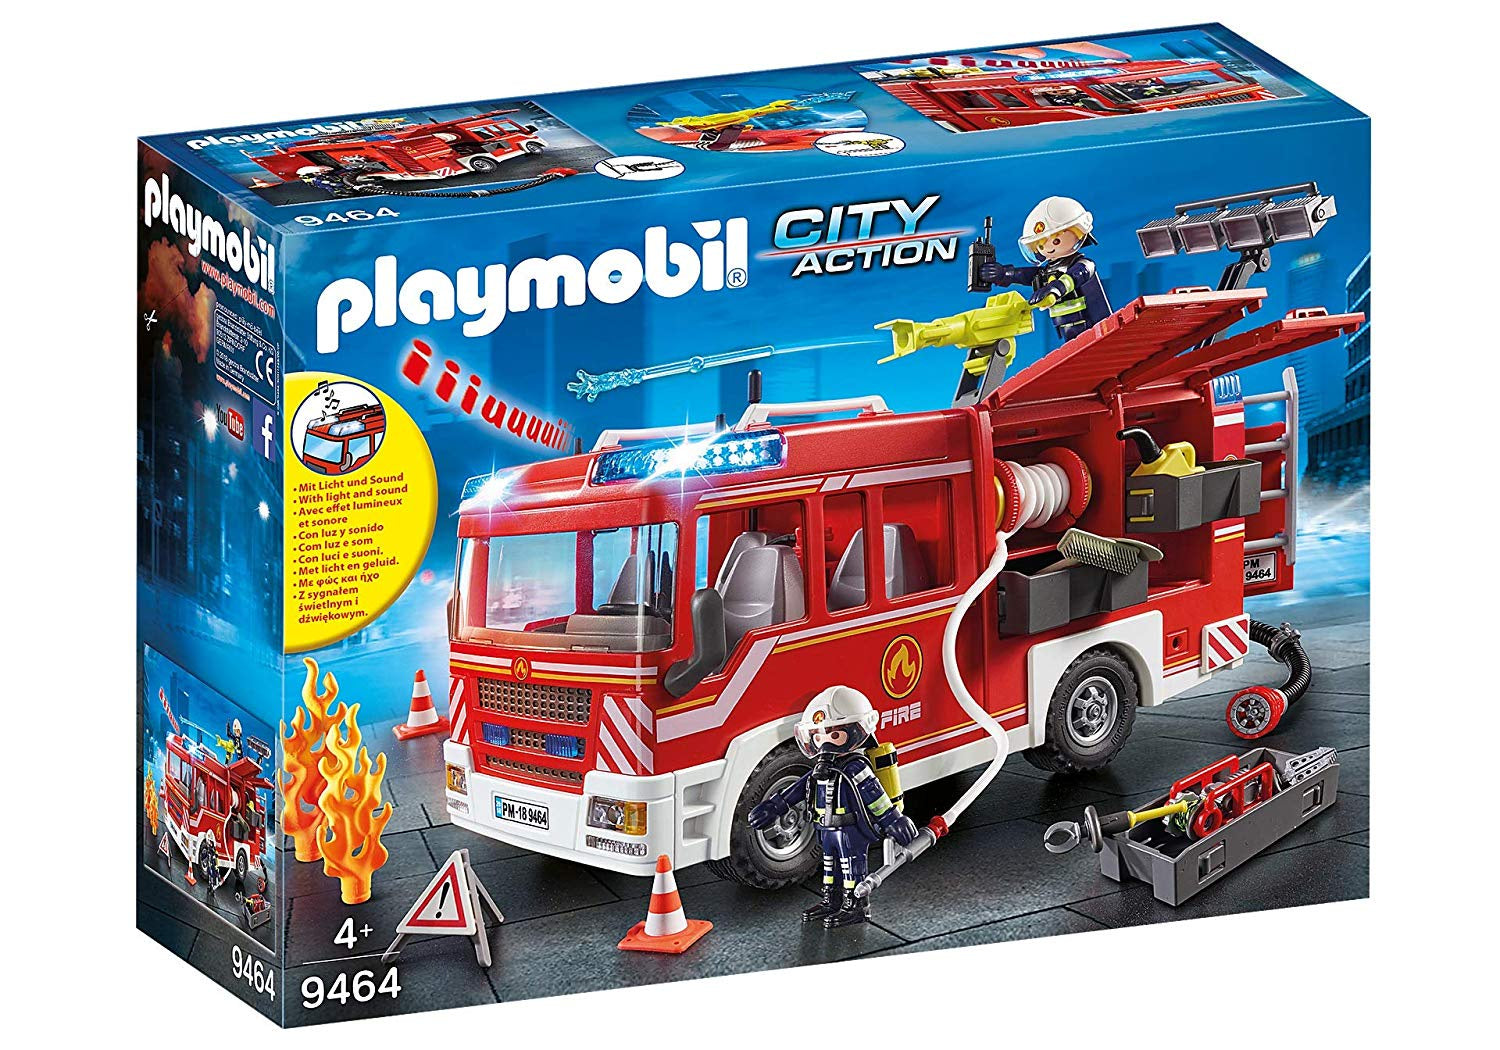 Playmobil City Action 9464 Fire Engine